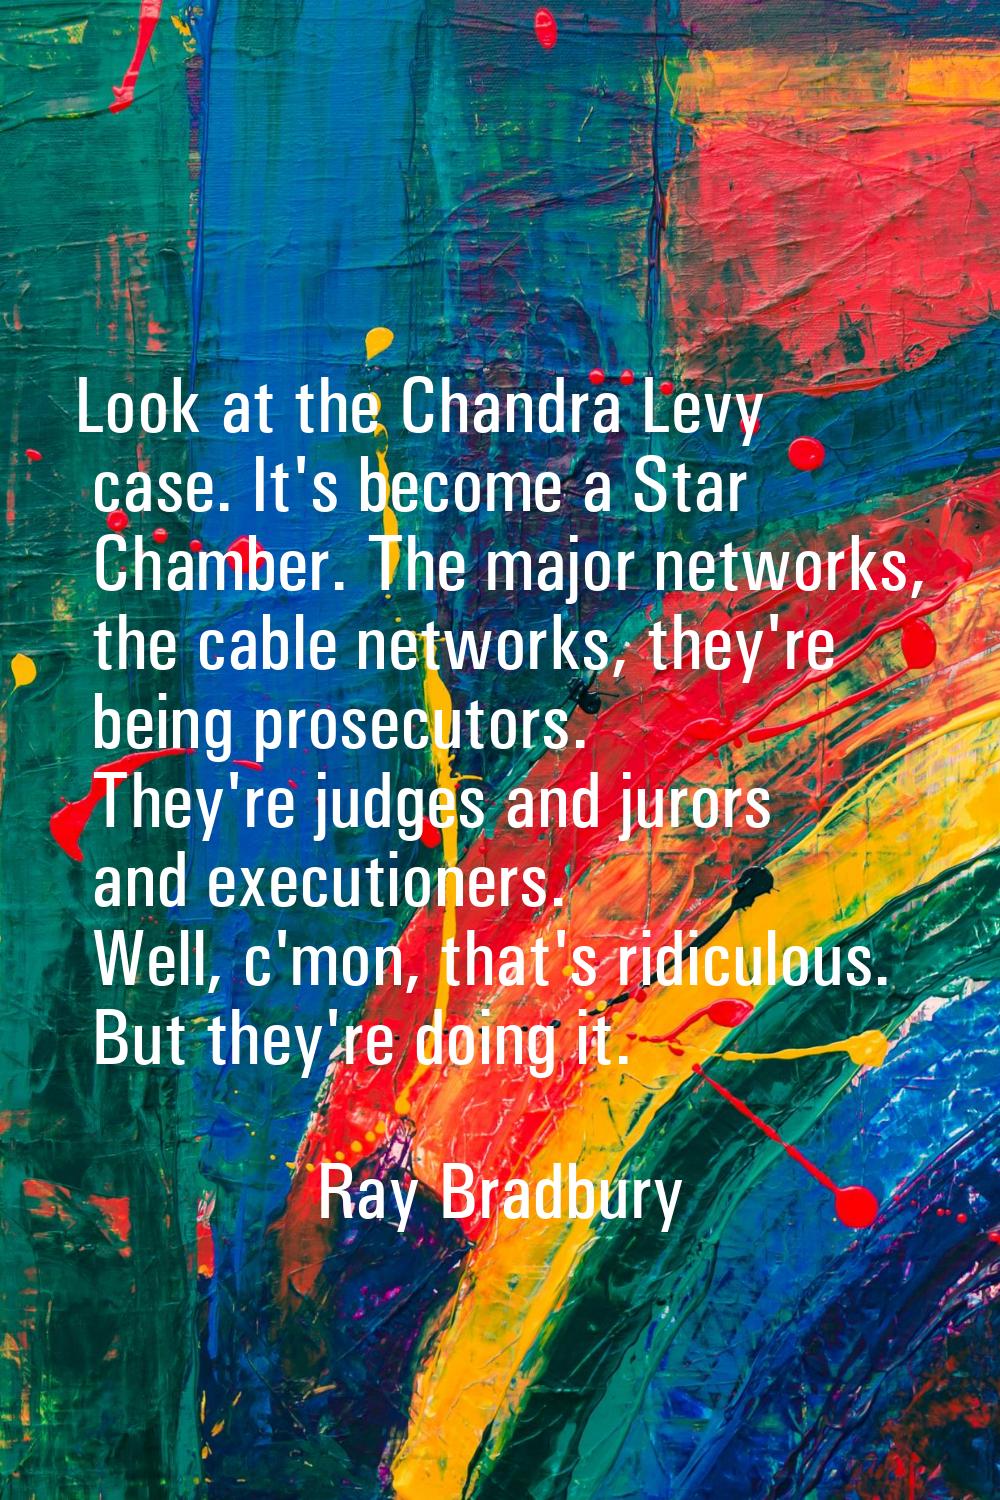 Look at the Chandra Levy case. It's become a Star Chamber. The major networks, the cable networks, 